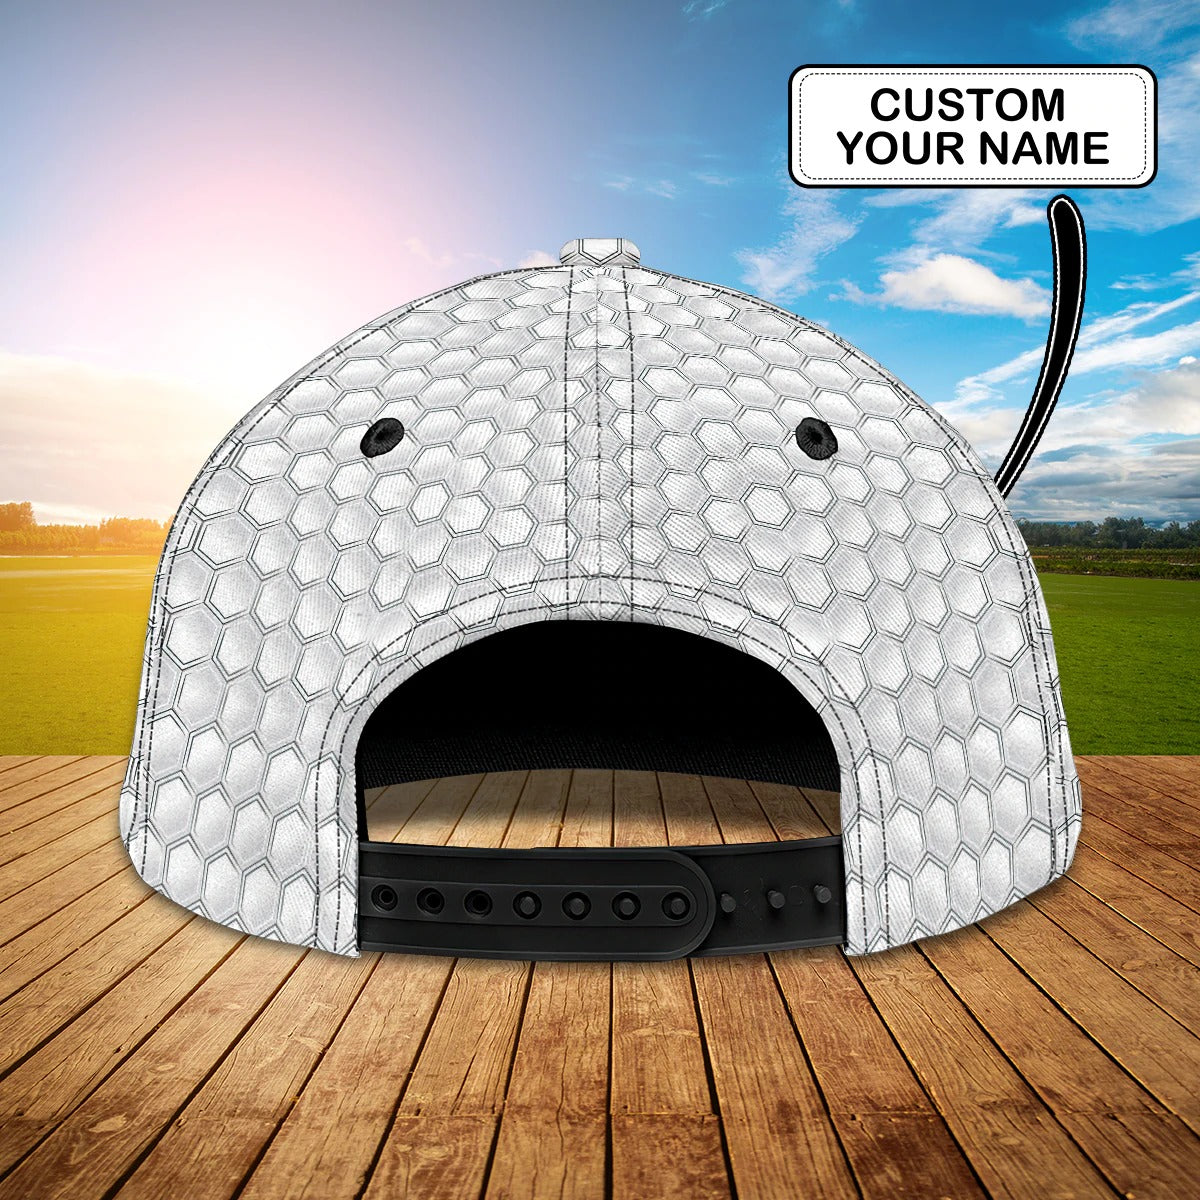 Custom With Name 3D Baseball Cap Hat For Golf Man/ Plan For The Day With Golf/ Gift A Golf Lover